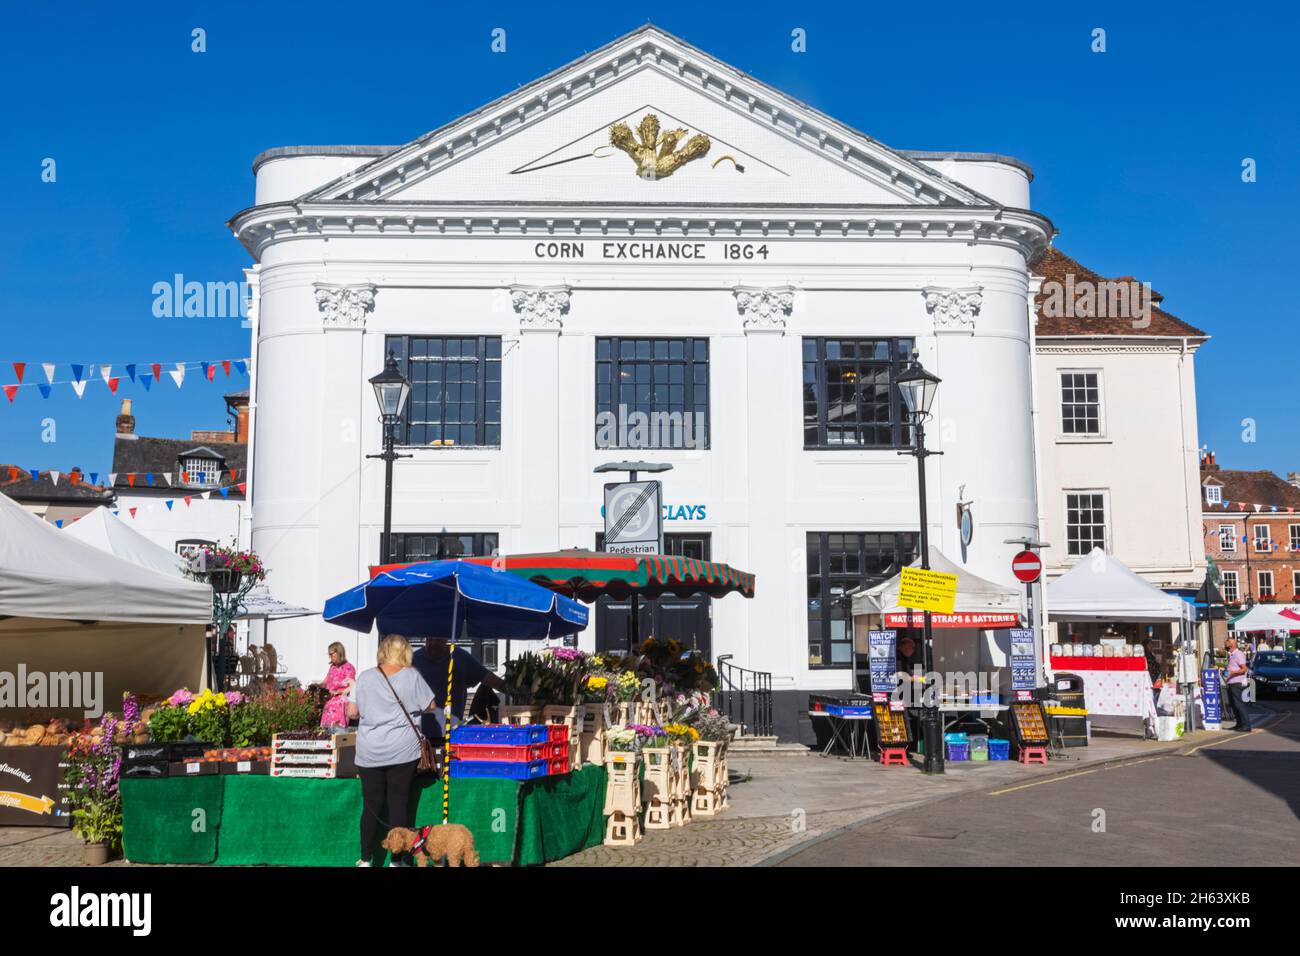 england,hampshire,test valley,romsey,old corn exchamge building and street market Stock Photo